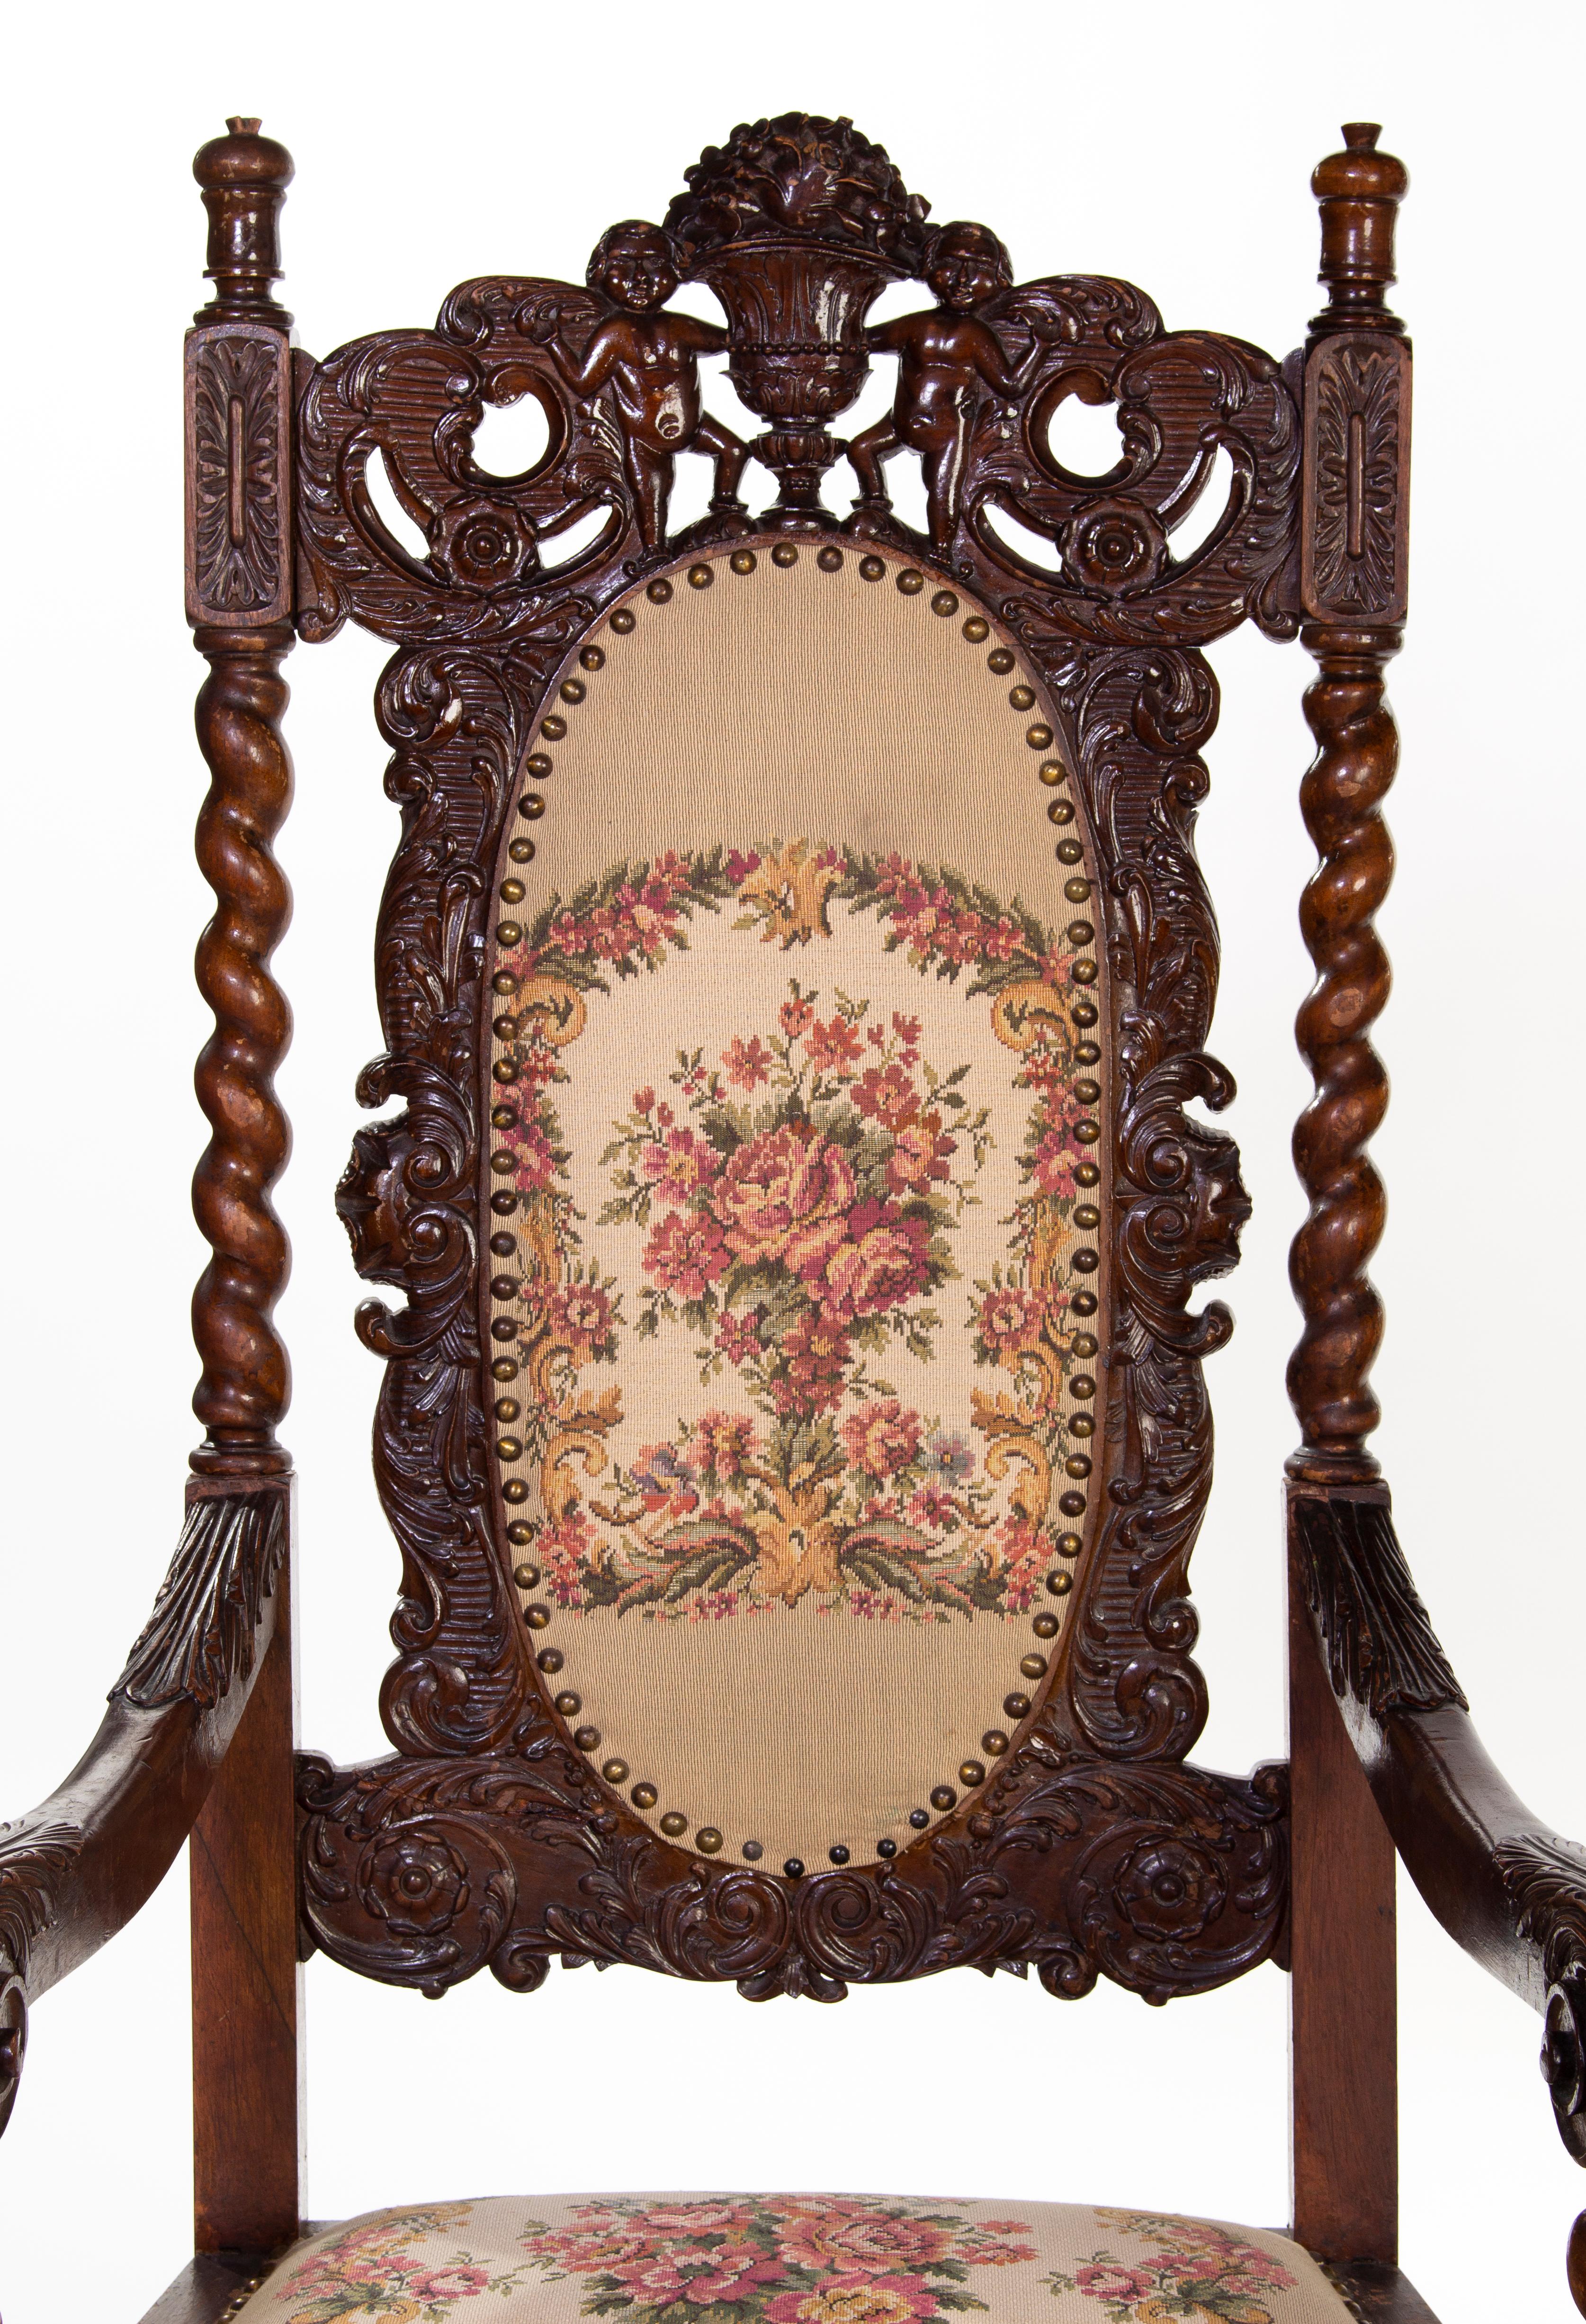 Antique basswood throne chairs in pair in renaissance revival style,
with fine carved details and embroidered upholstery.
Manufactured arround 1900.